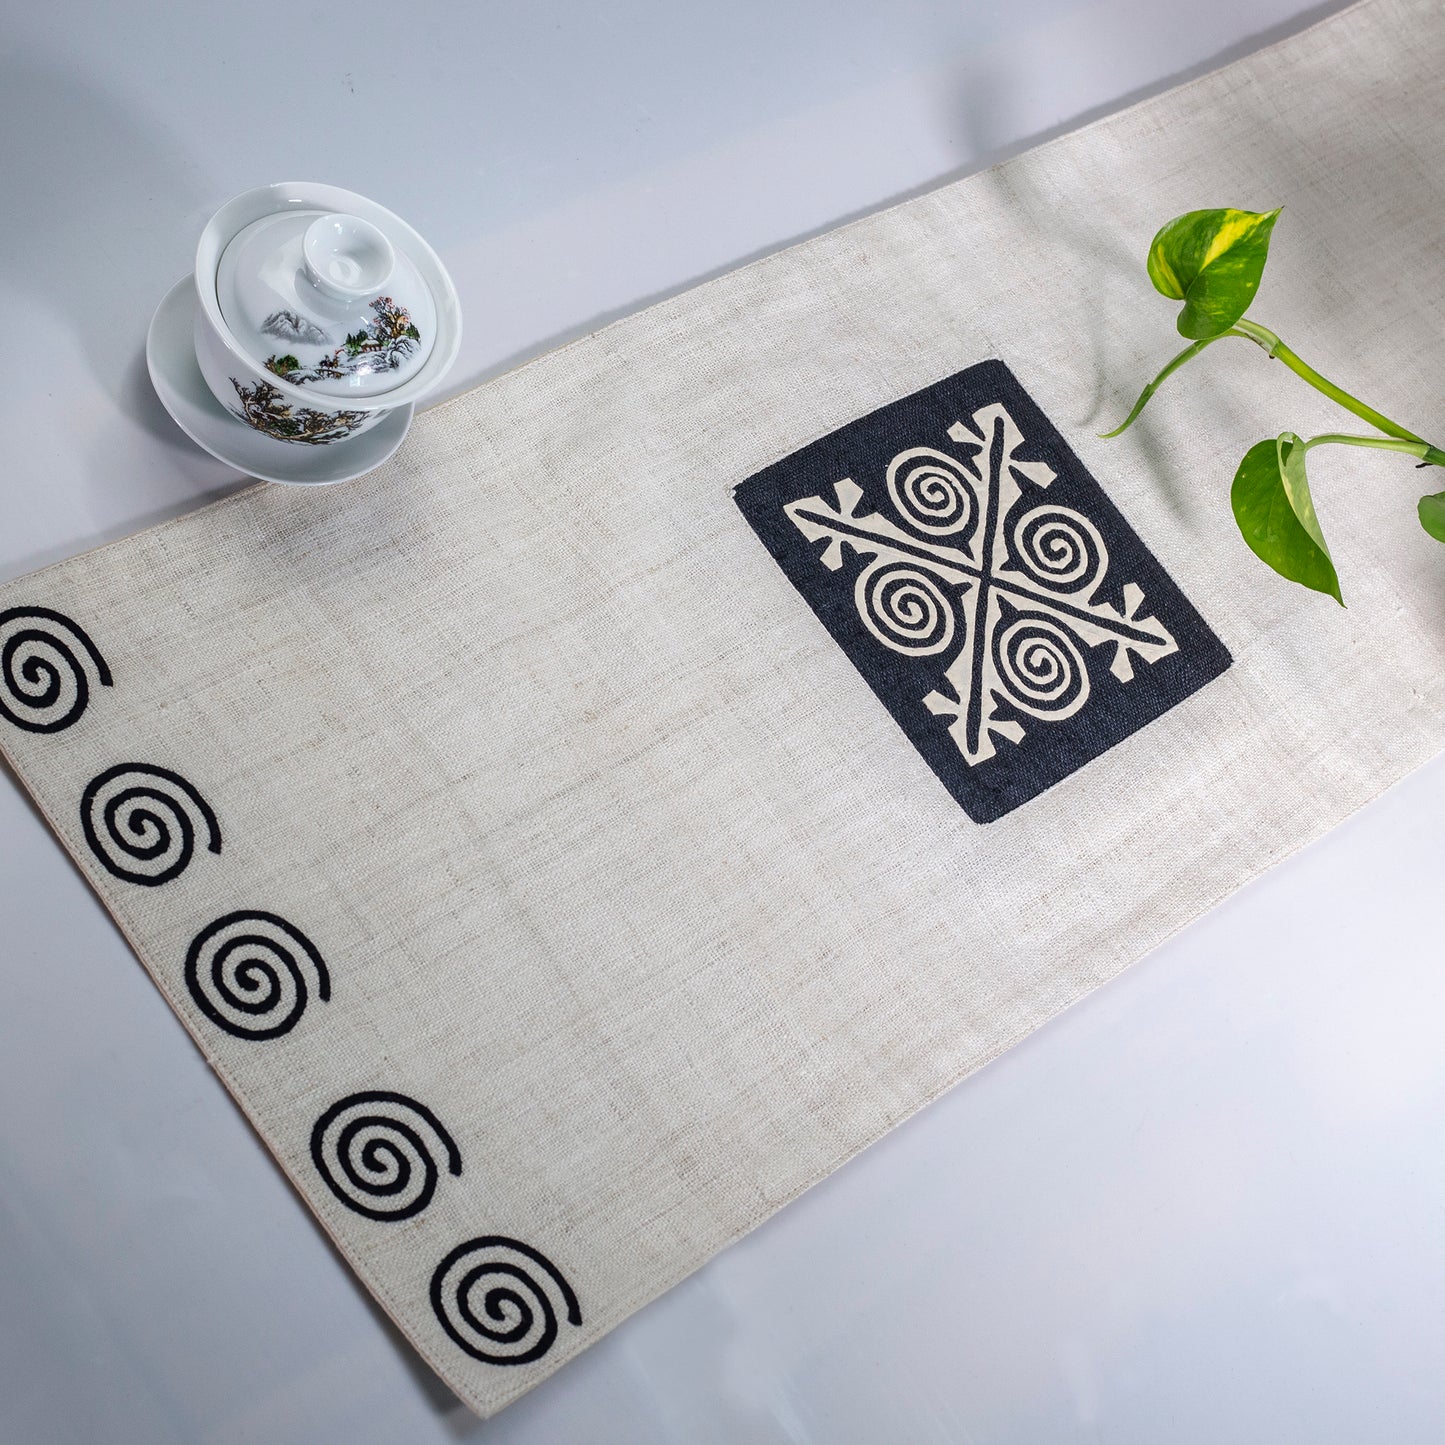 White Hemp Table Runner, patterns on black background, hand-stitched details at both ends